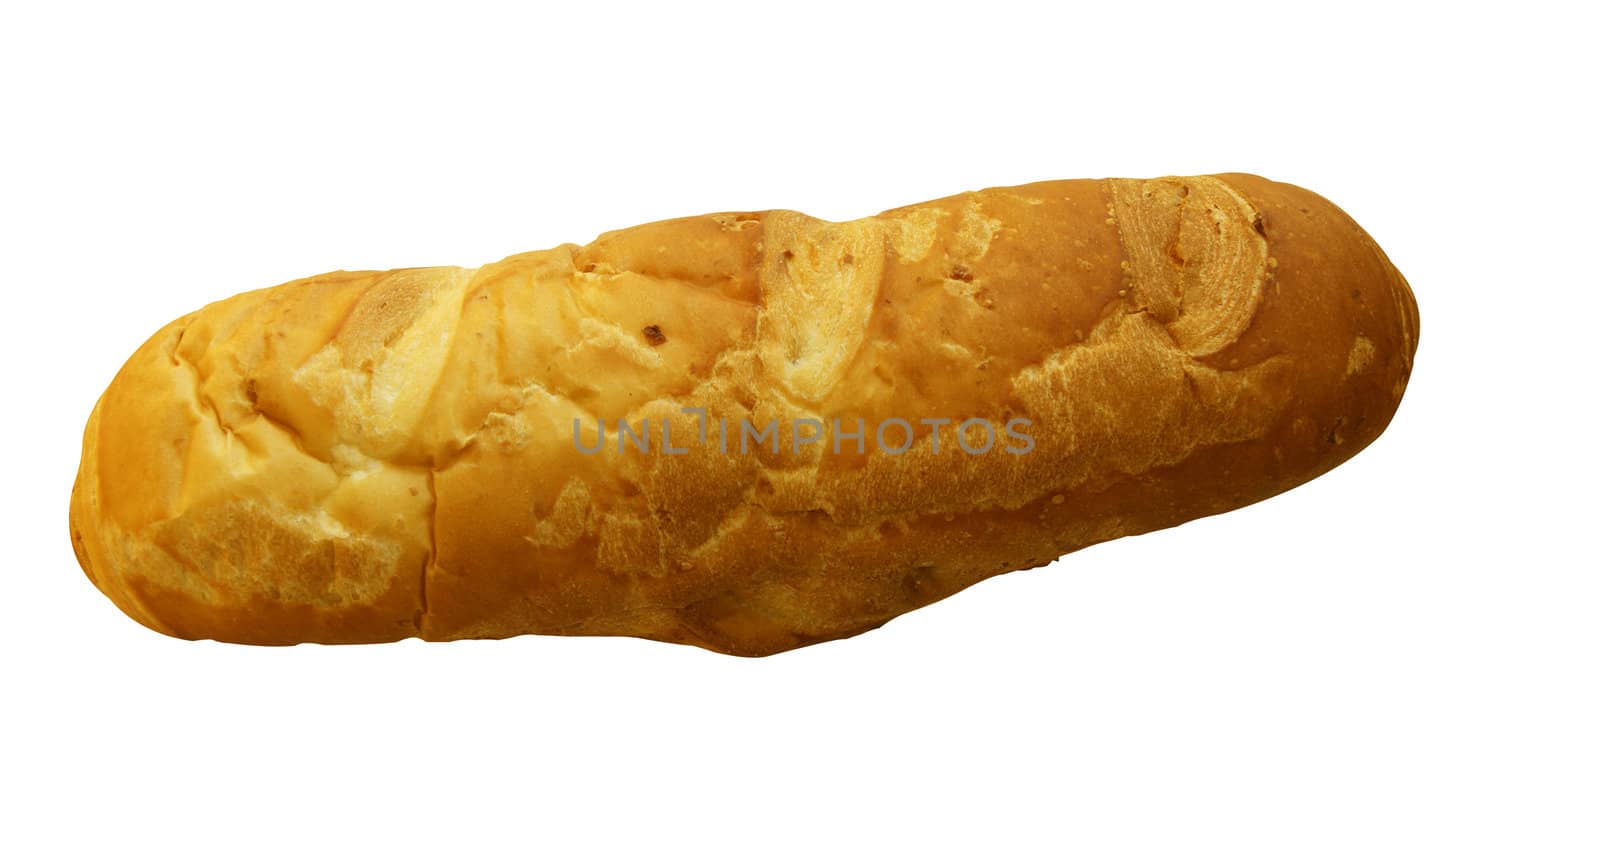 Long loaf of bread on white by cobol1964